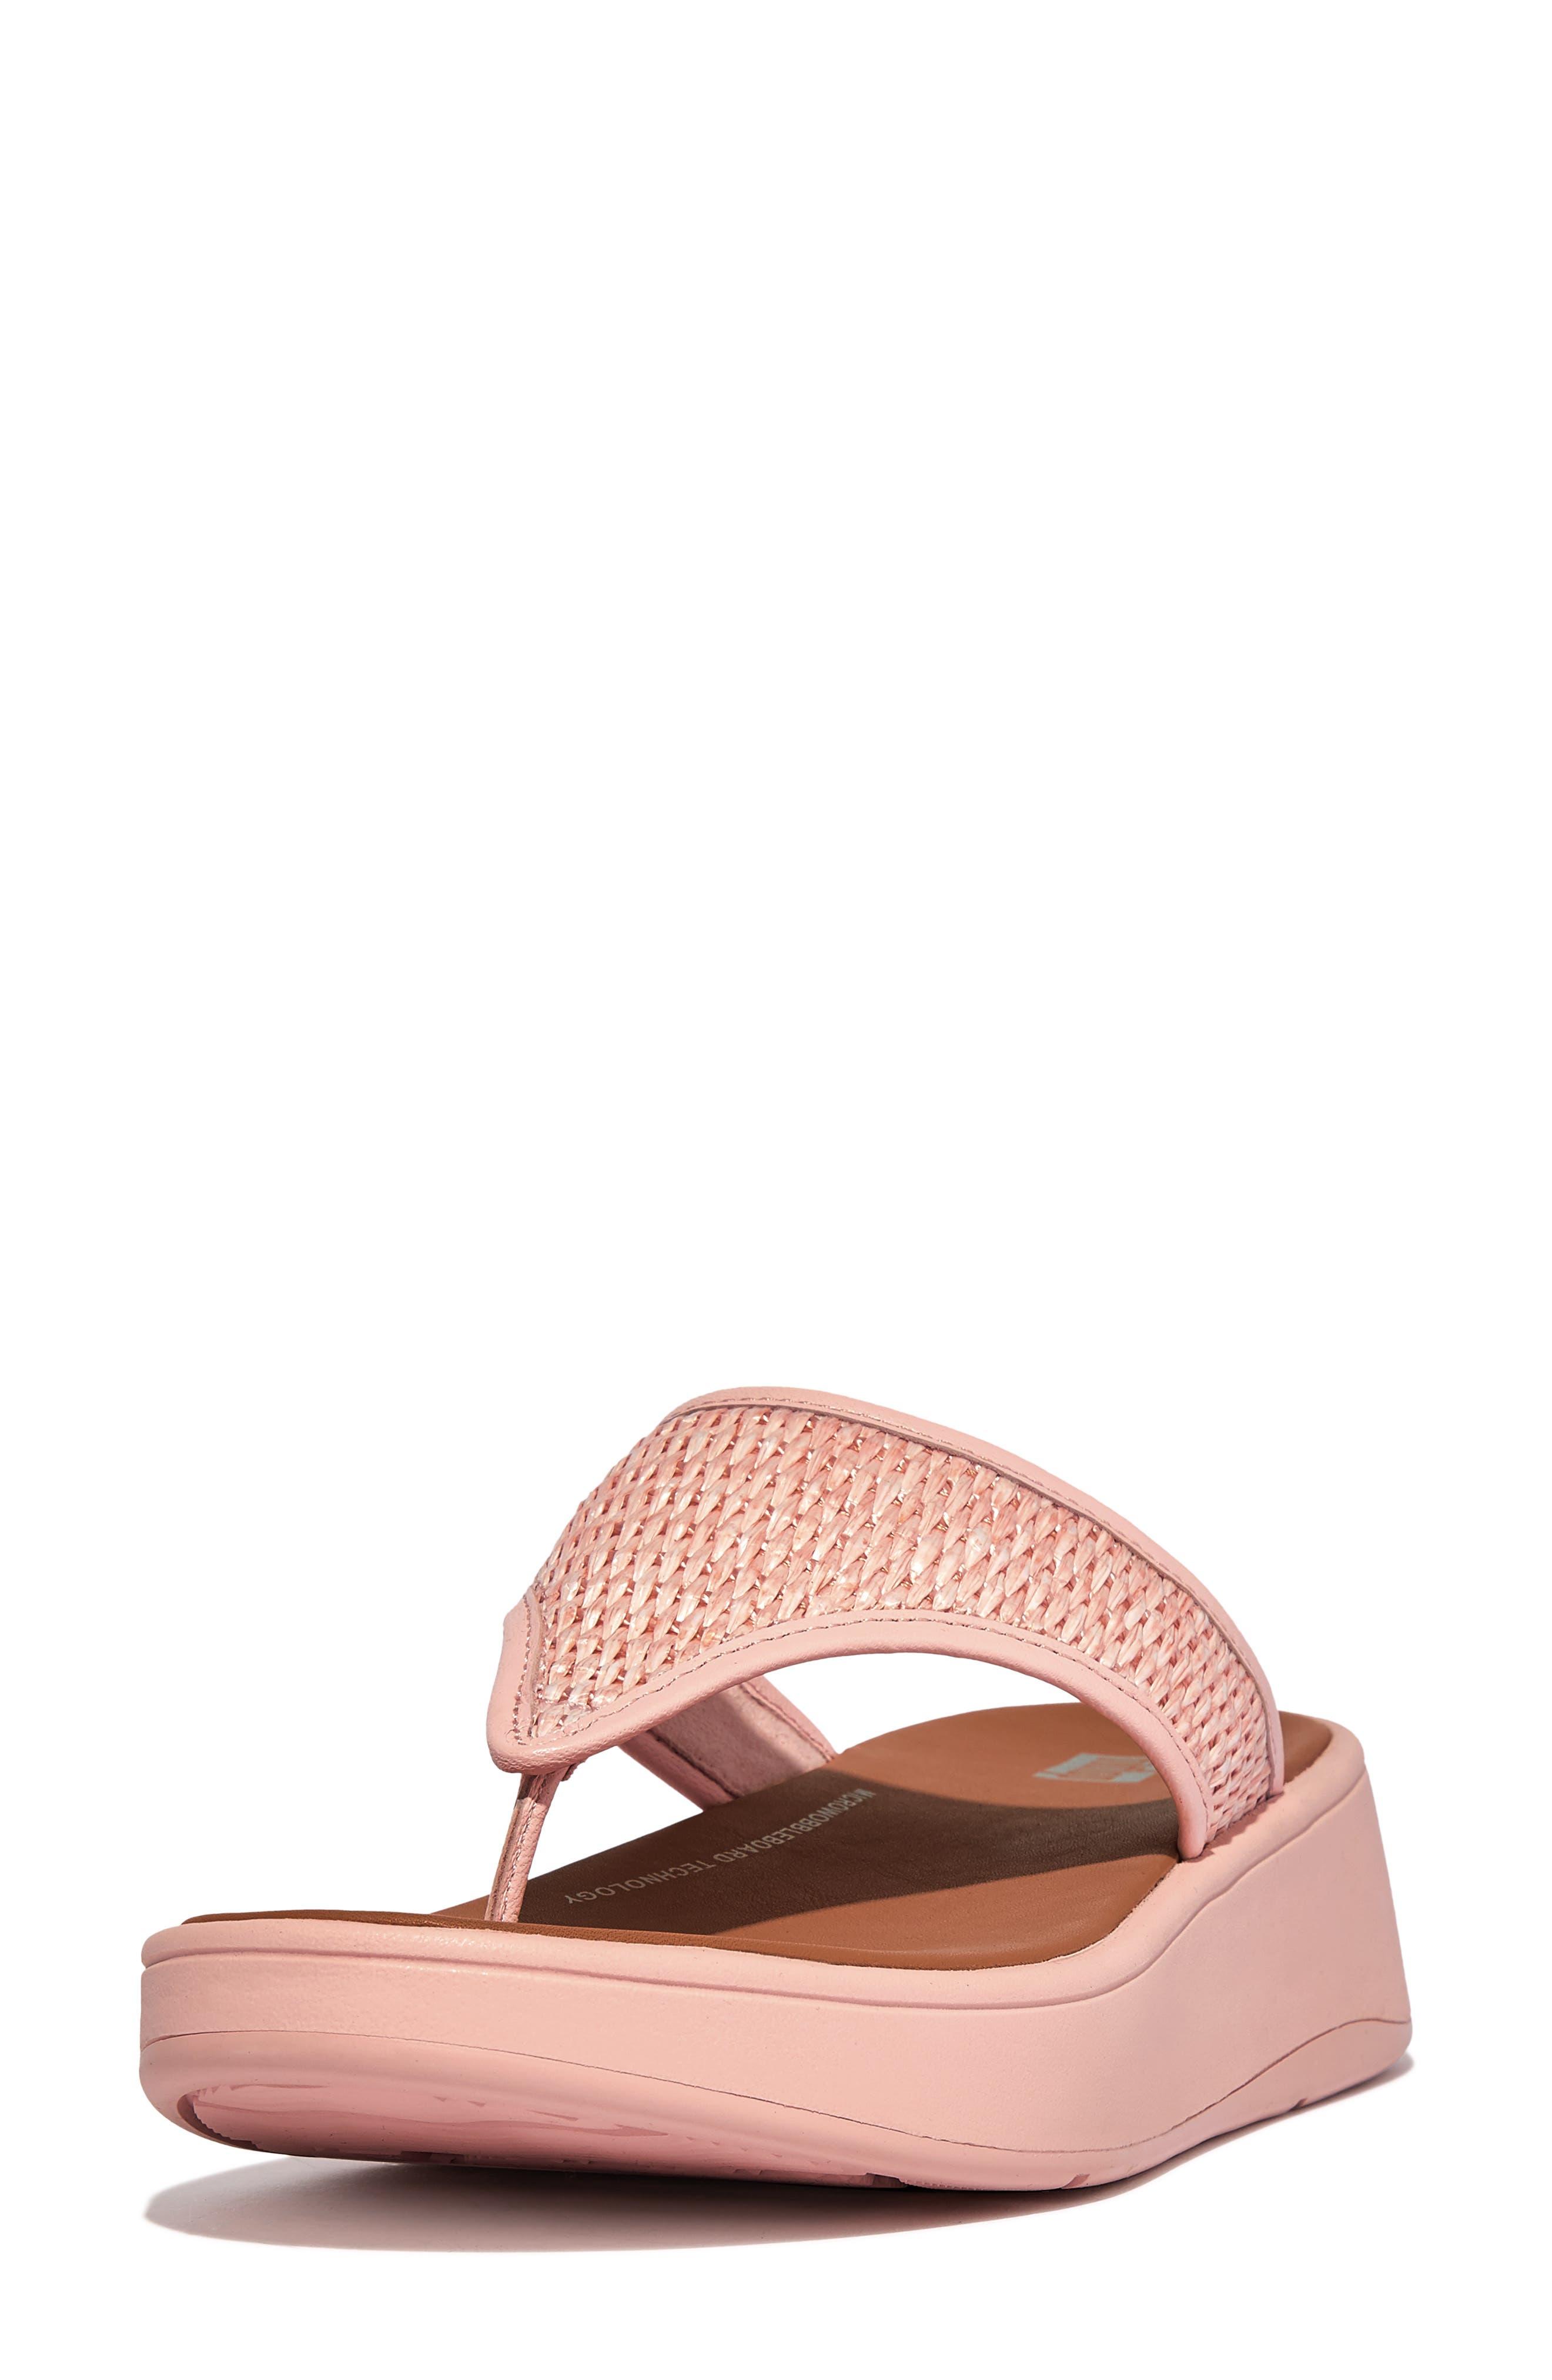 Fitflop F-mode Woven Platform Sandal in Pink | Lyst